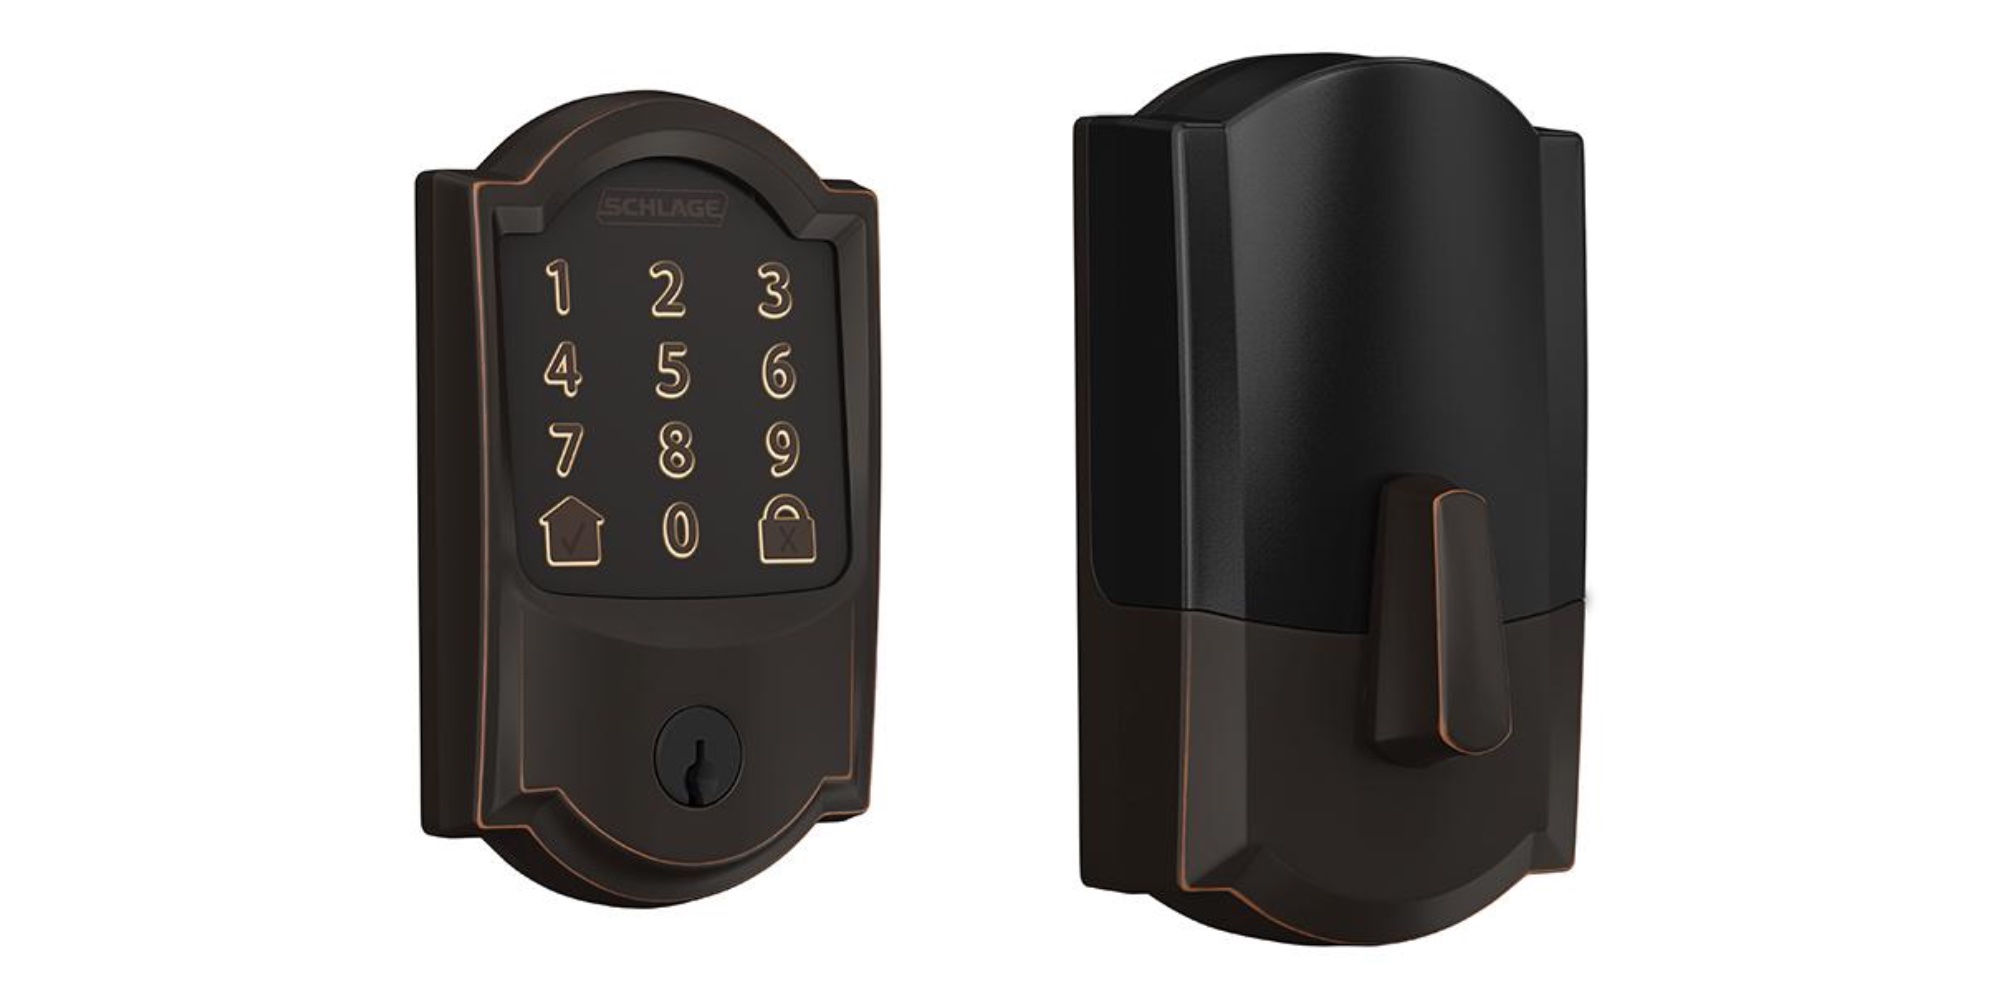 Unlock this $55 discount on the Schlage Encode Smart Wi-Fi Deadbolt at